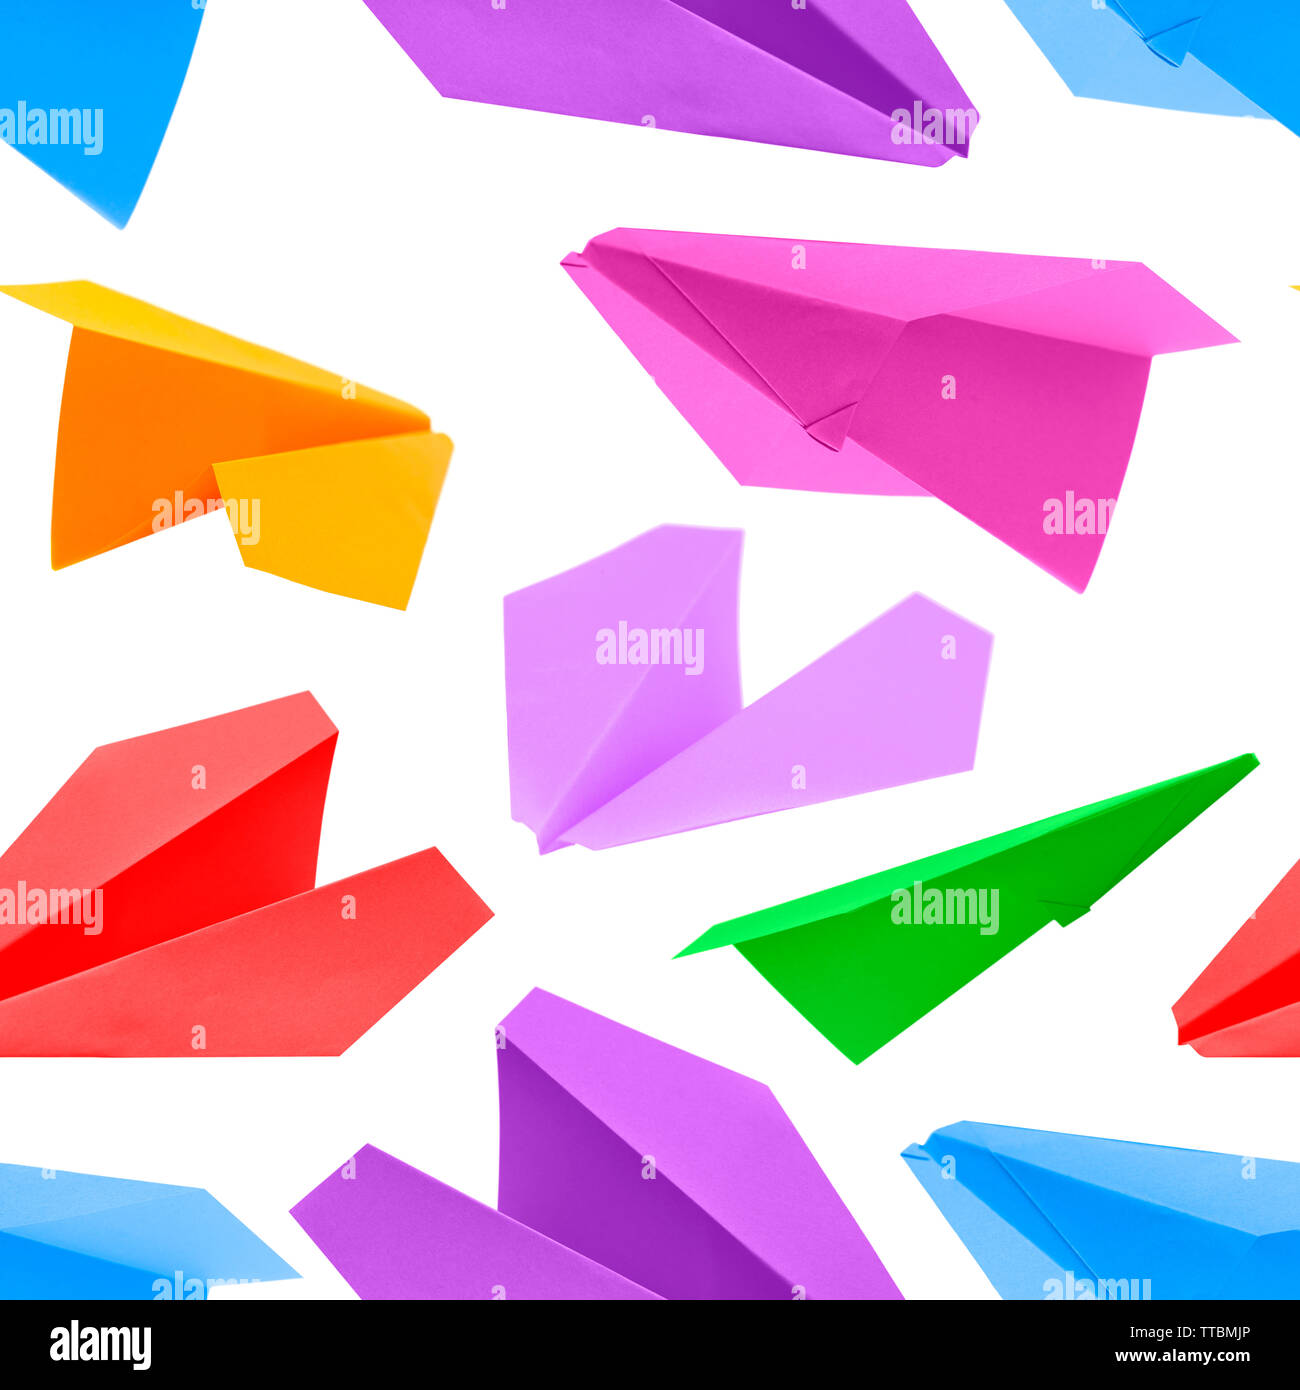 paper plane made of color paper background seamless repeatable Stock Photo